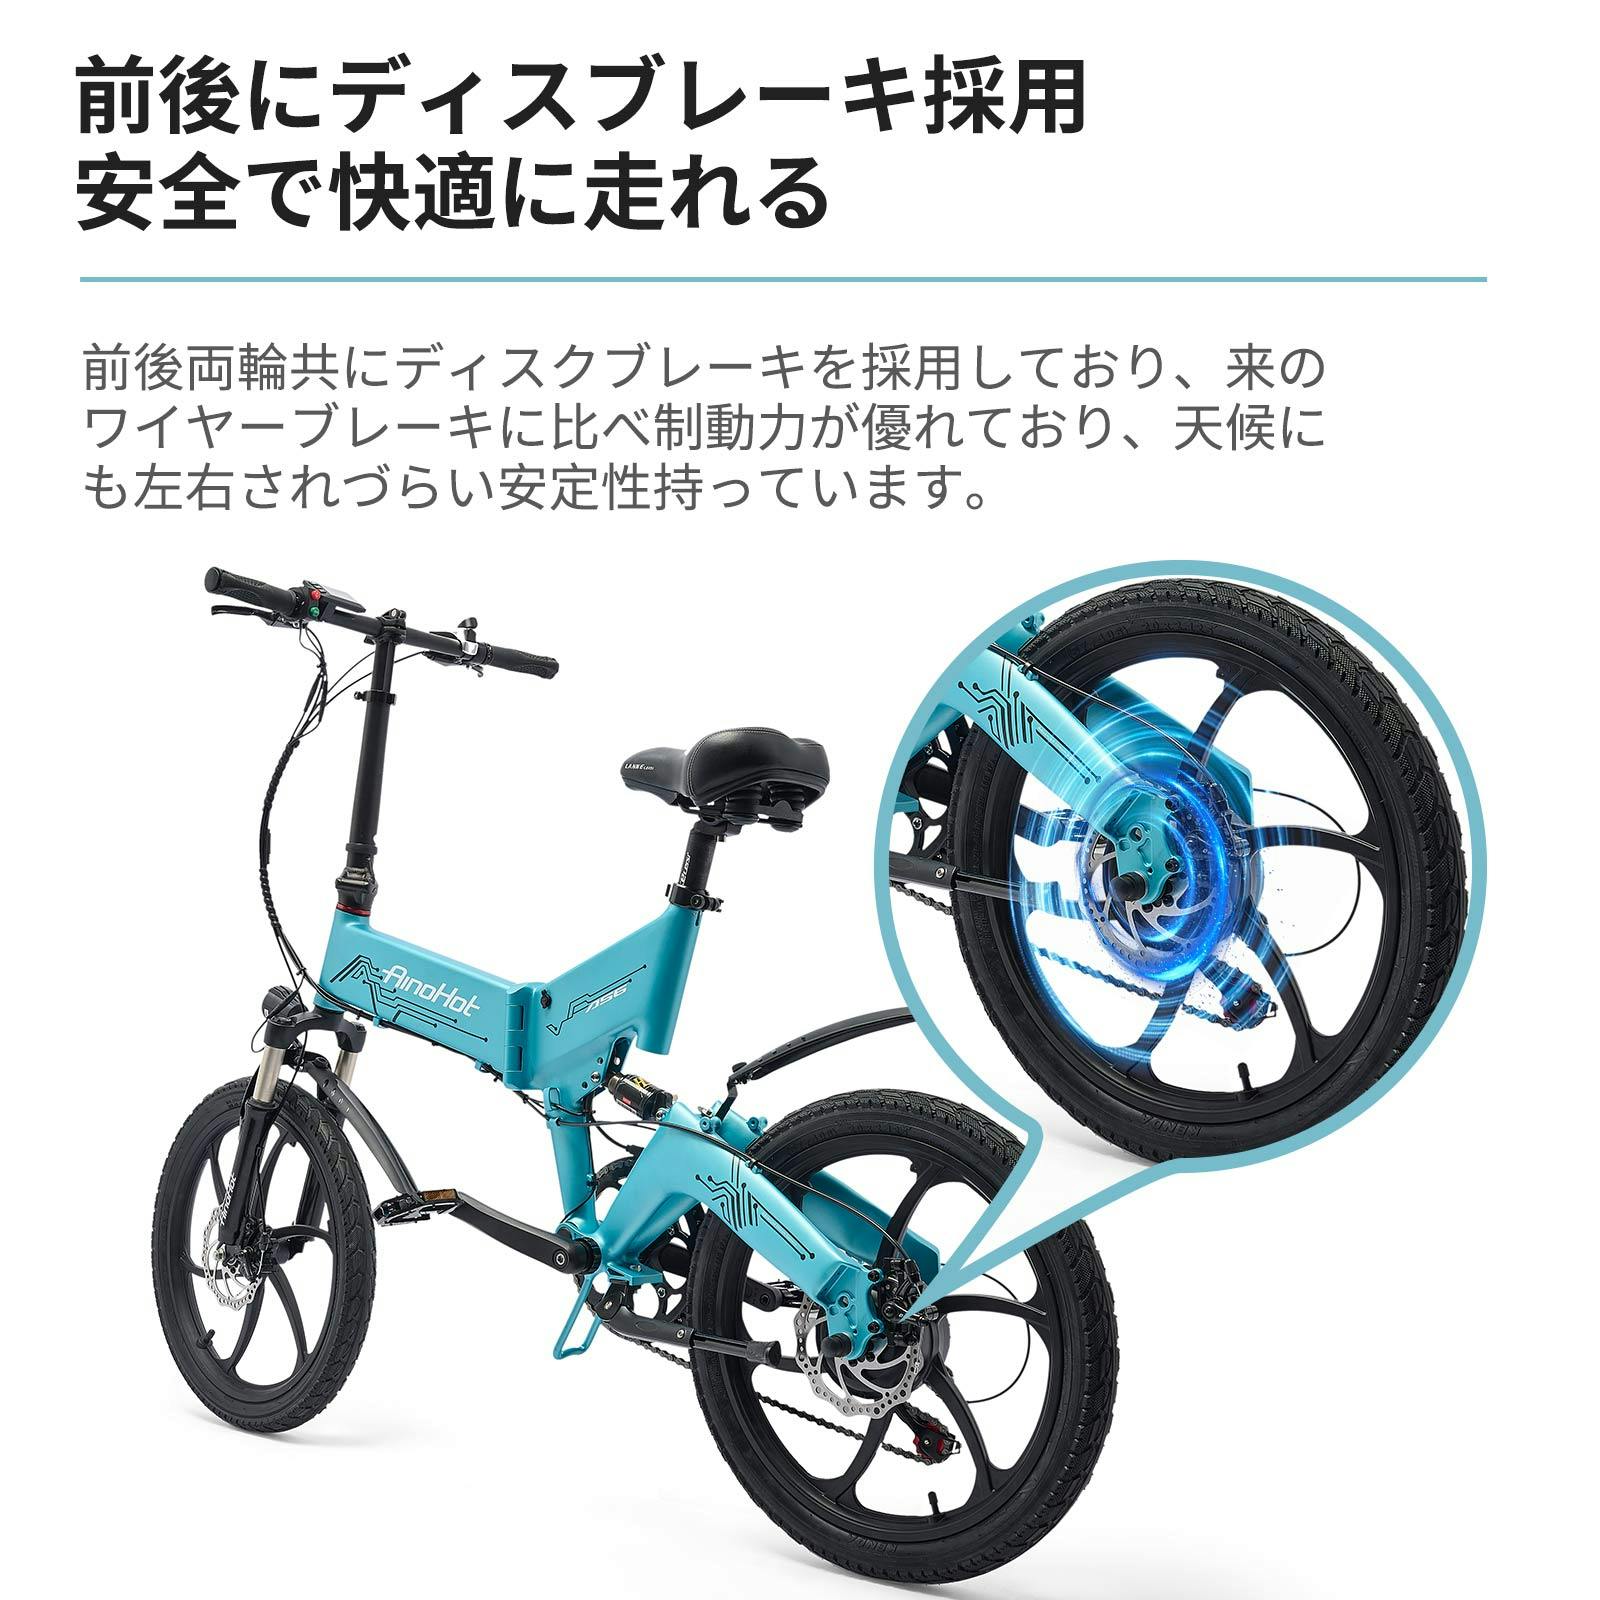 AINOHOT AS6 電動アシスト自転車 【形式認定済】 公道走行可 折り畳み 